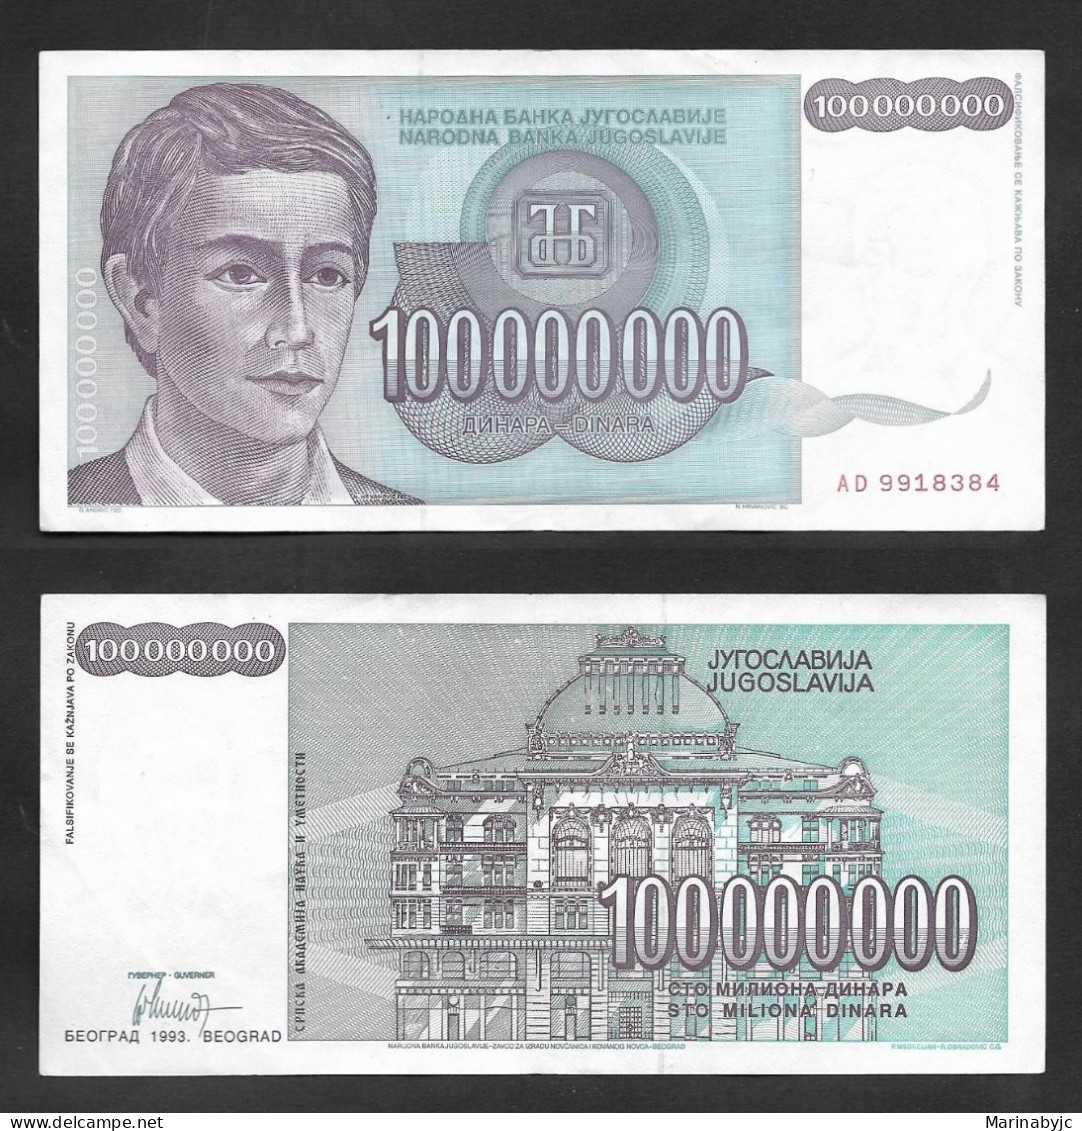 SE)1992 YUGOSLAVIA, BANKNOTE OF 100,000,000 DINARS OF THE CENTRAL BANK OF YUGOSLAVIA, WITH REVERSE, VF - Oblitérés